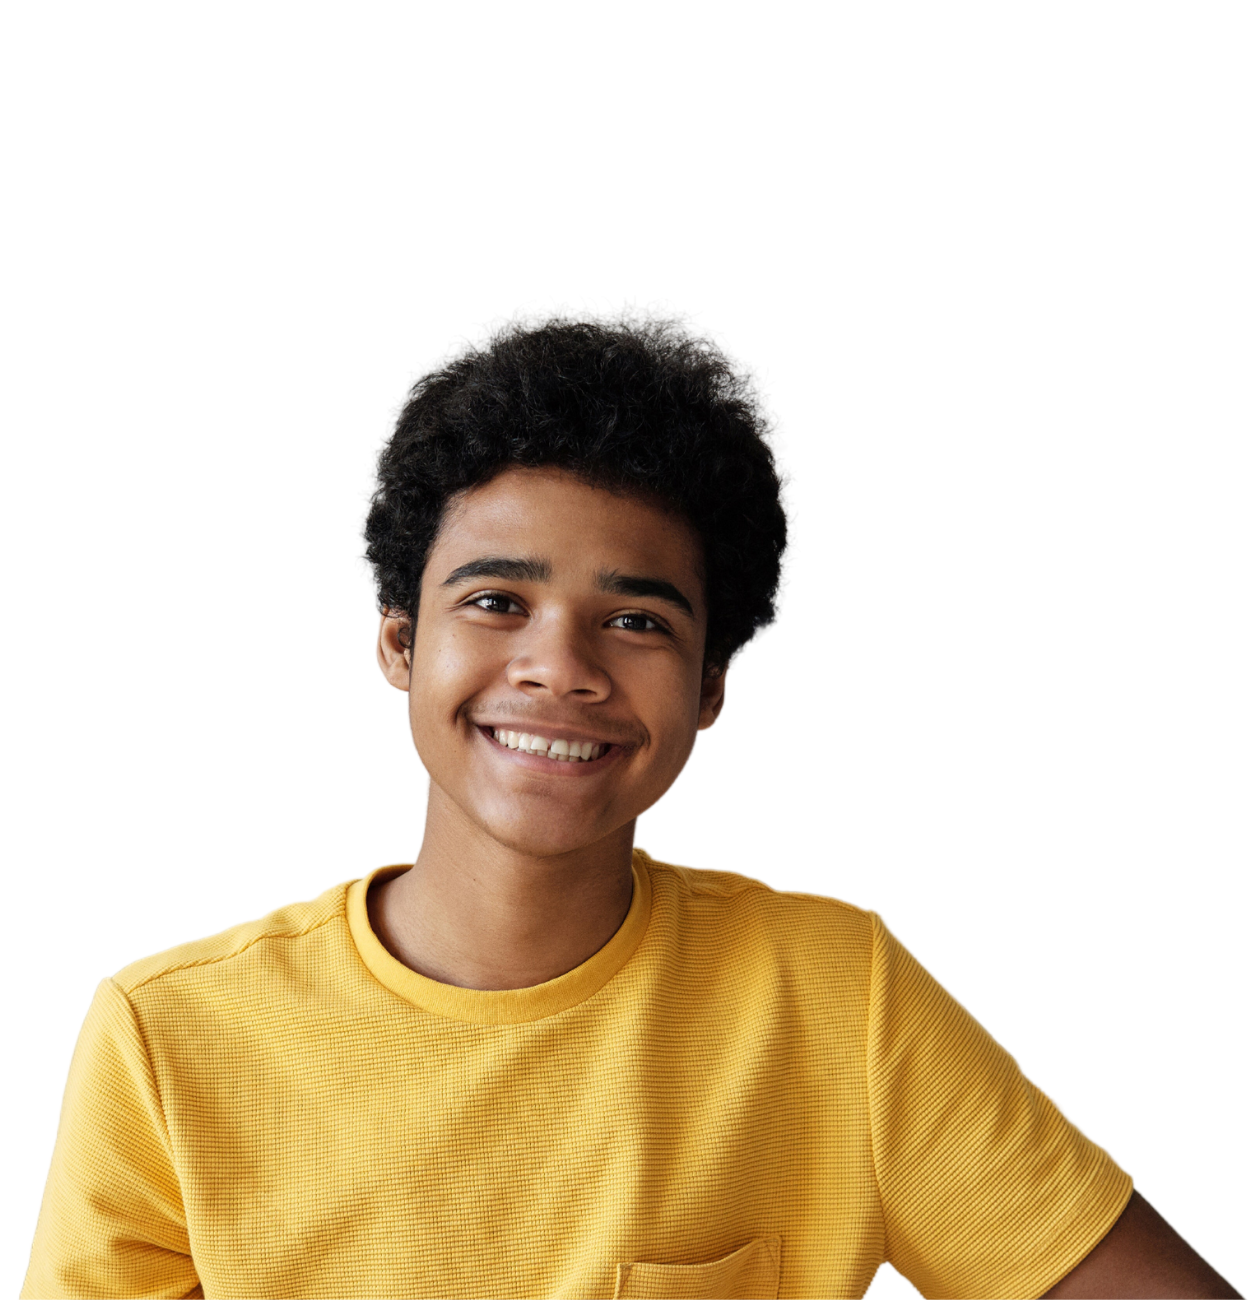 Young boy smiling in yellow t-shirt